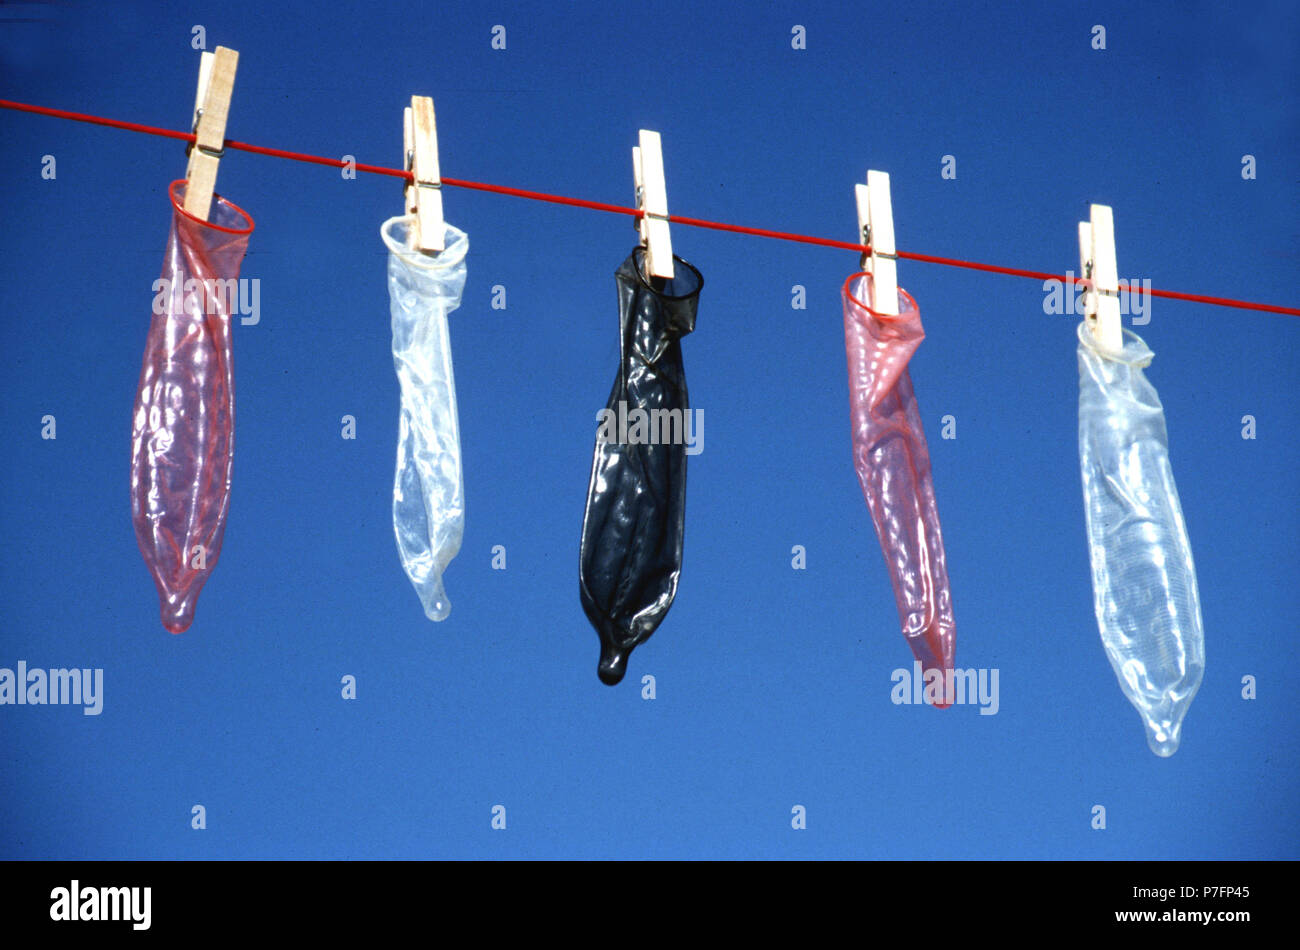 Condoms on the clothesline, Berlin, Germany Stock Photo